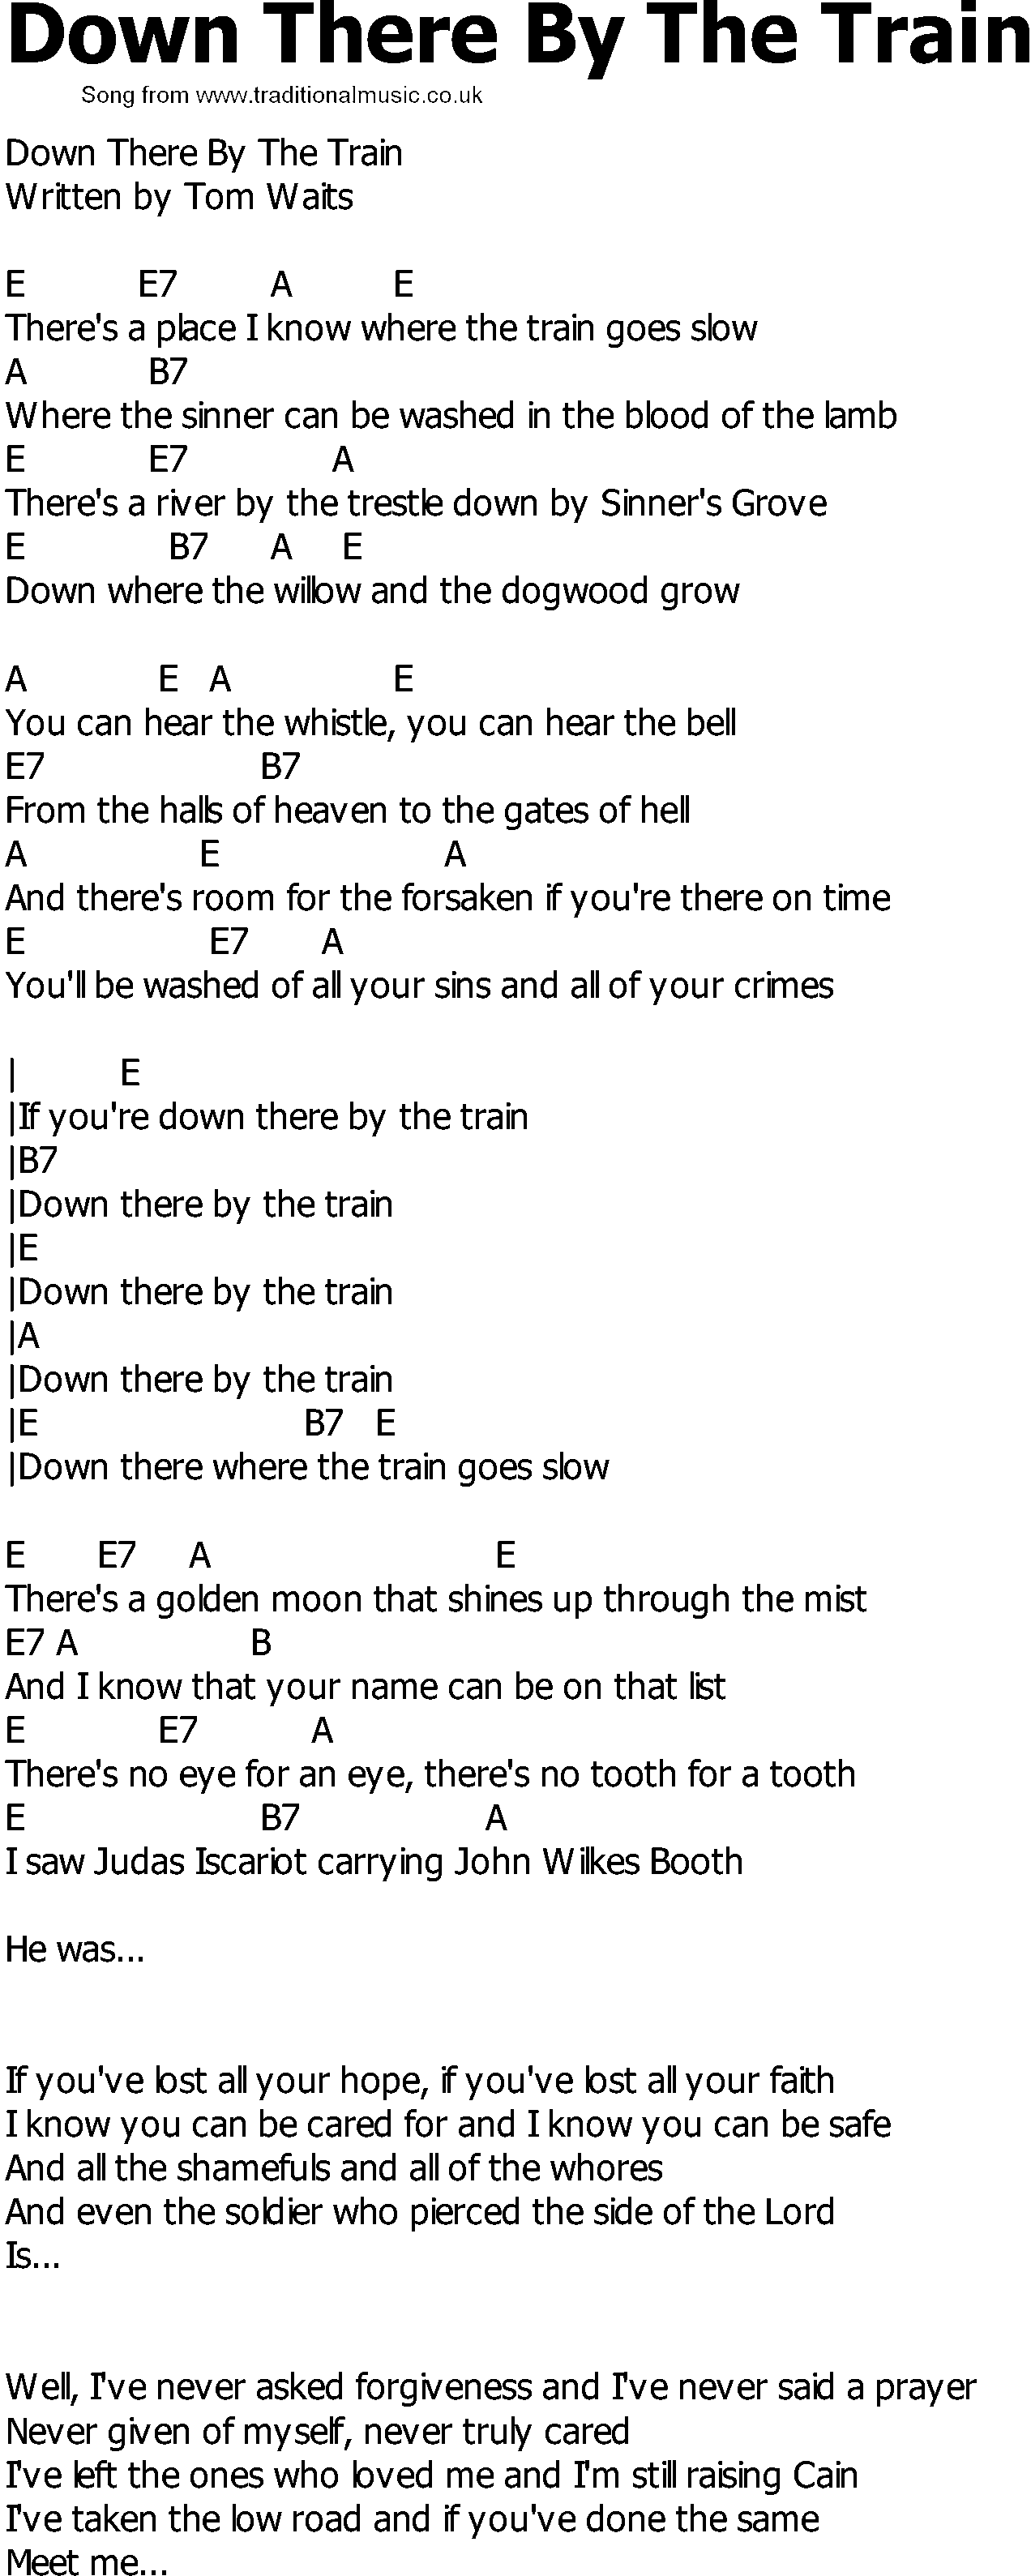 Old Country song lyrics with chords - Down There By The Train